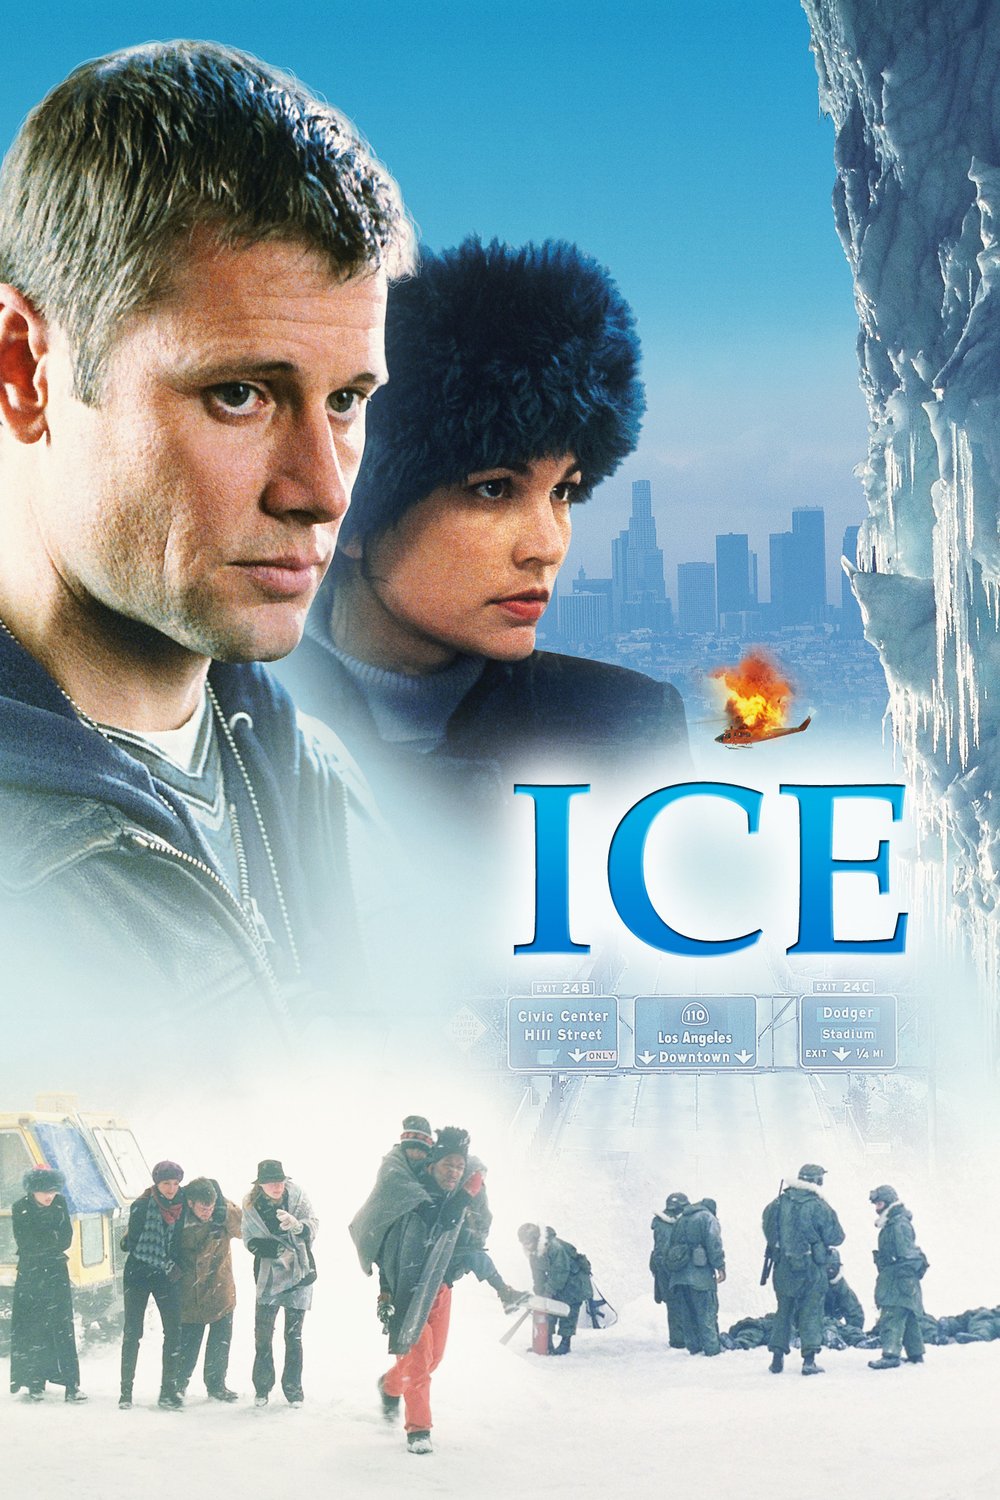 Poster of the movie Ice